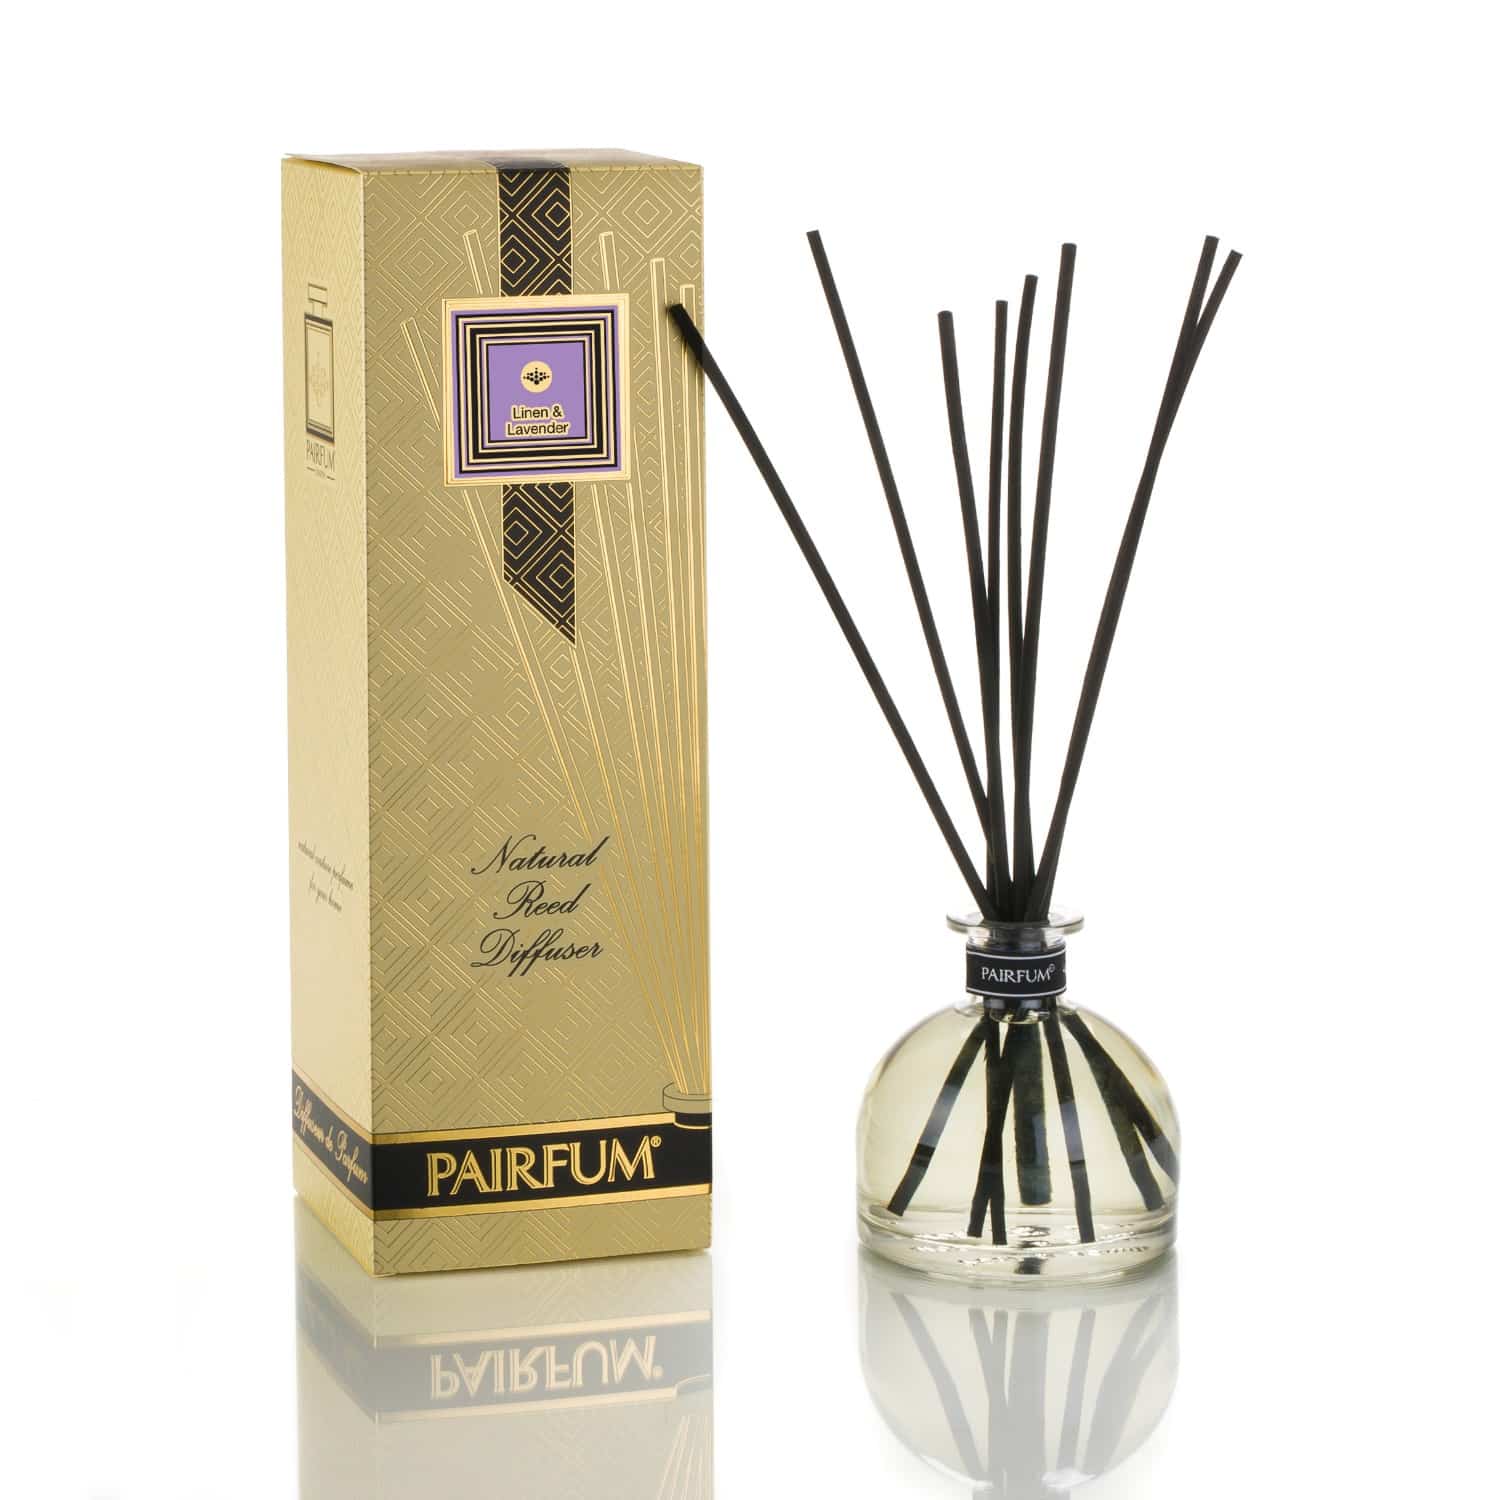 Pairfum Large Reed Diffuser Bell Signature Linen Lavender Perfect Mother's Day Gifts, Pairfum's natural reed diffusers.